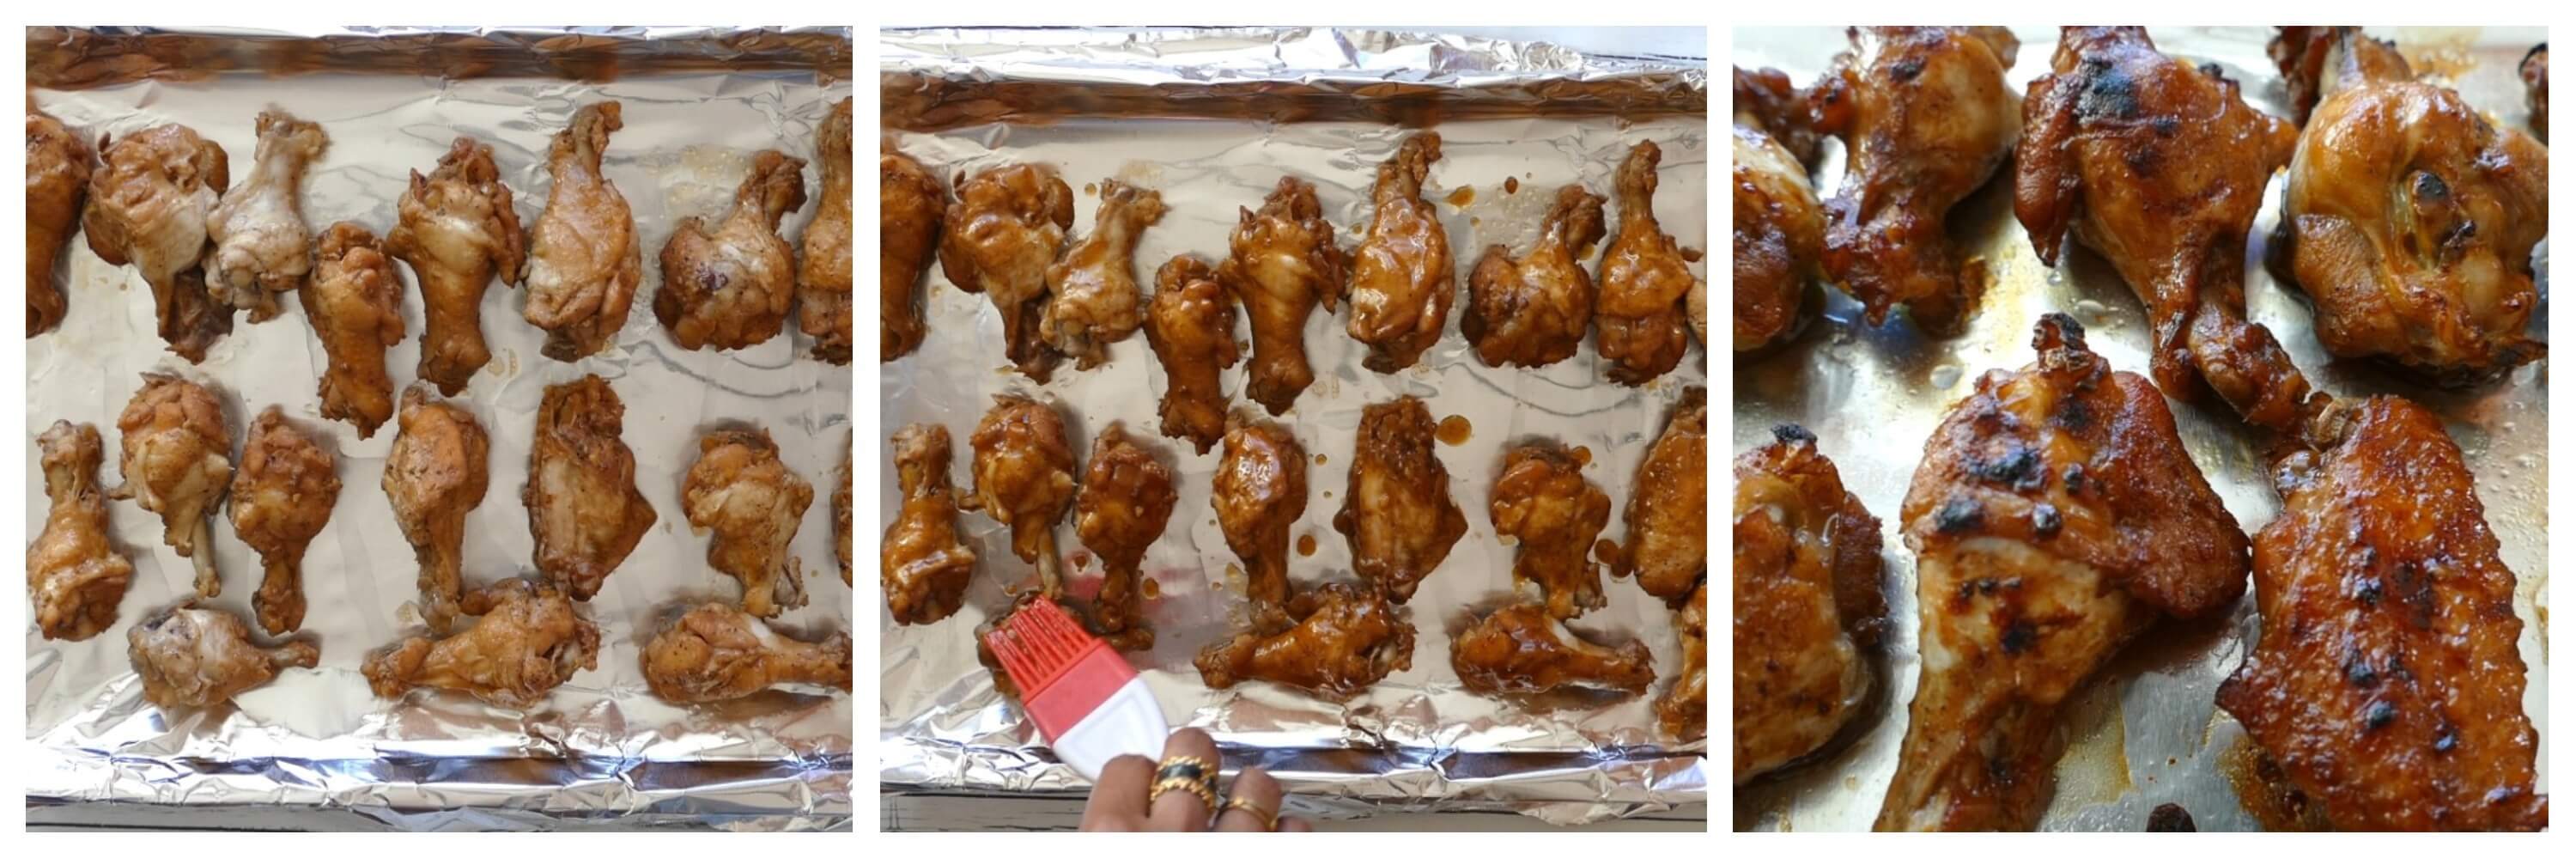 Instant Pot Teriyaki Wings Instructions collage - wings on foil-lined tray, brush with sauce, cooked wings with browned skin